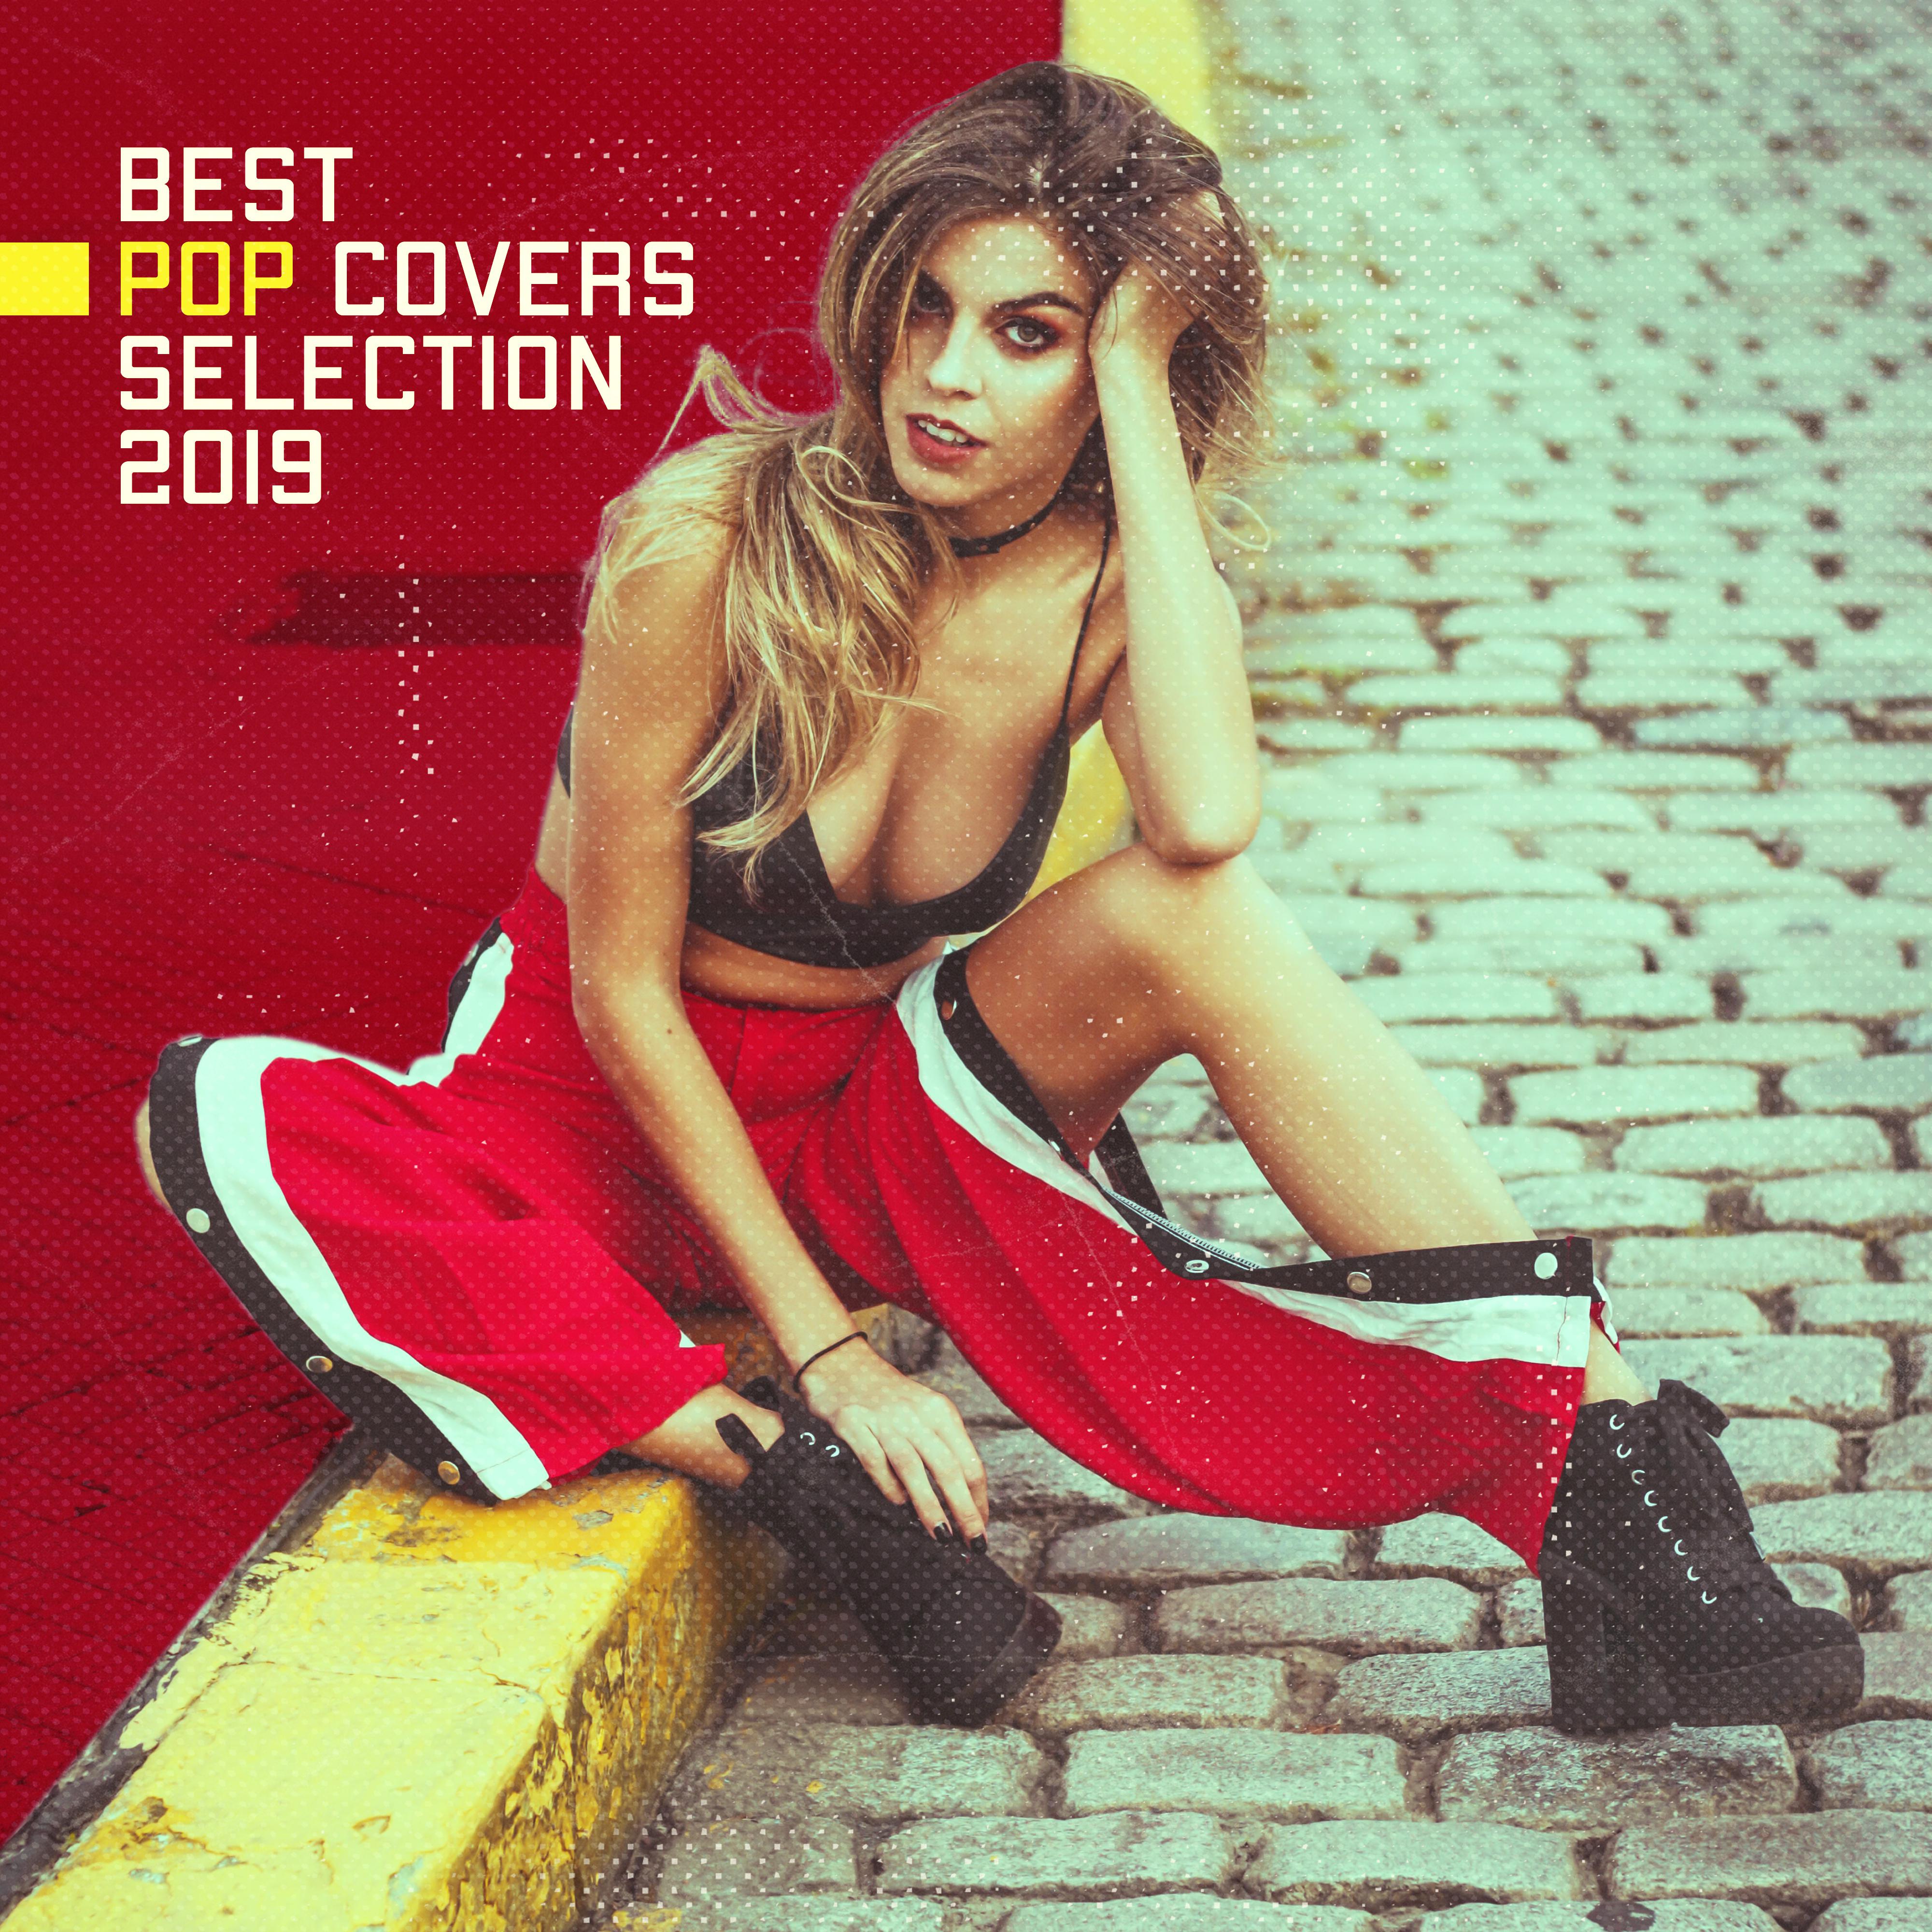 Best Pop Covers Selection 2019 – Compilation of Very Popular Tracks Played on Piano, Violin & Guitar